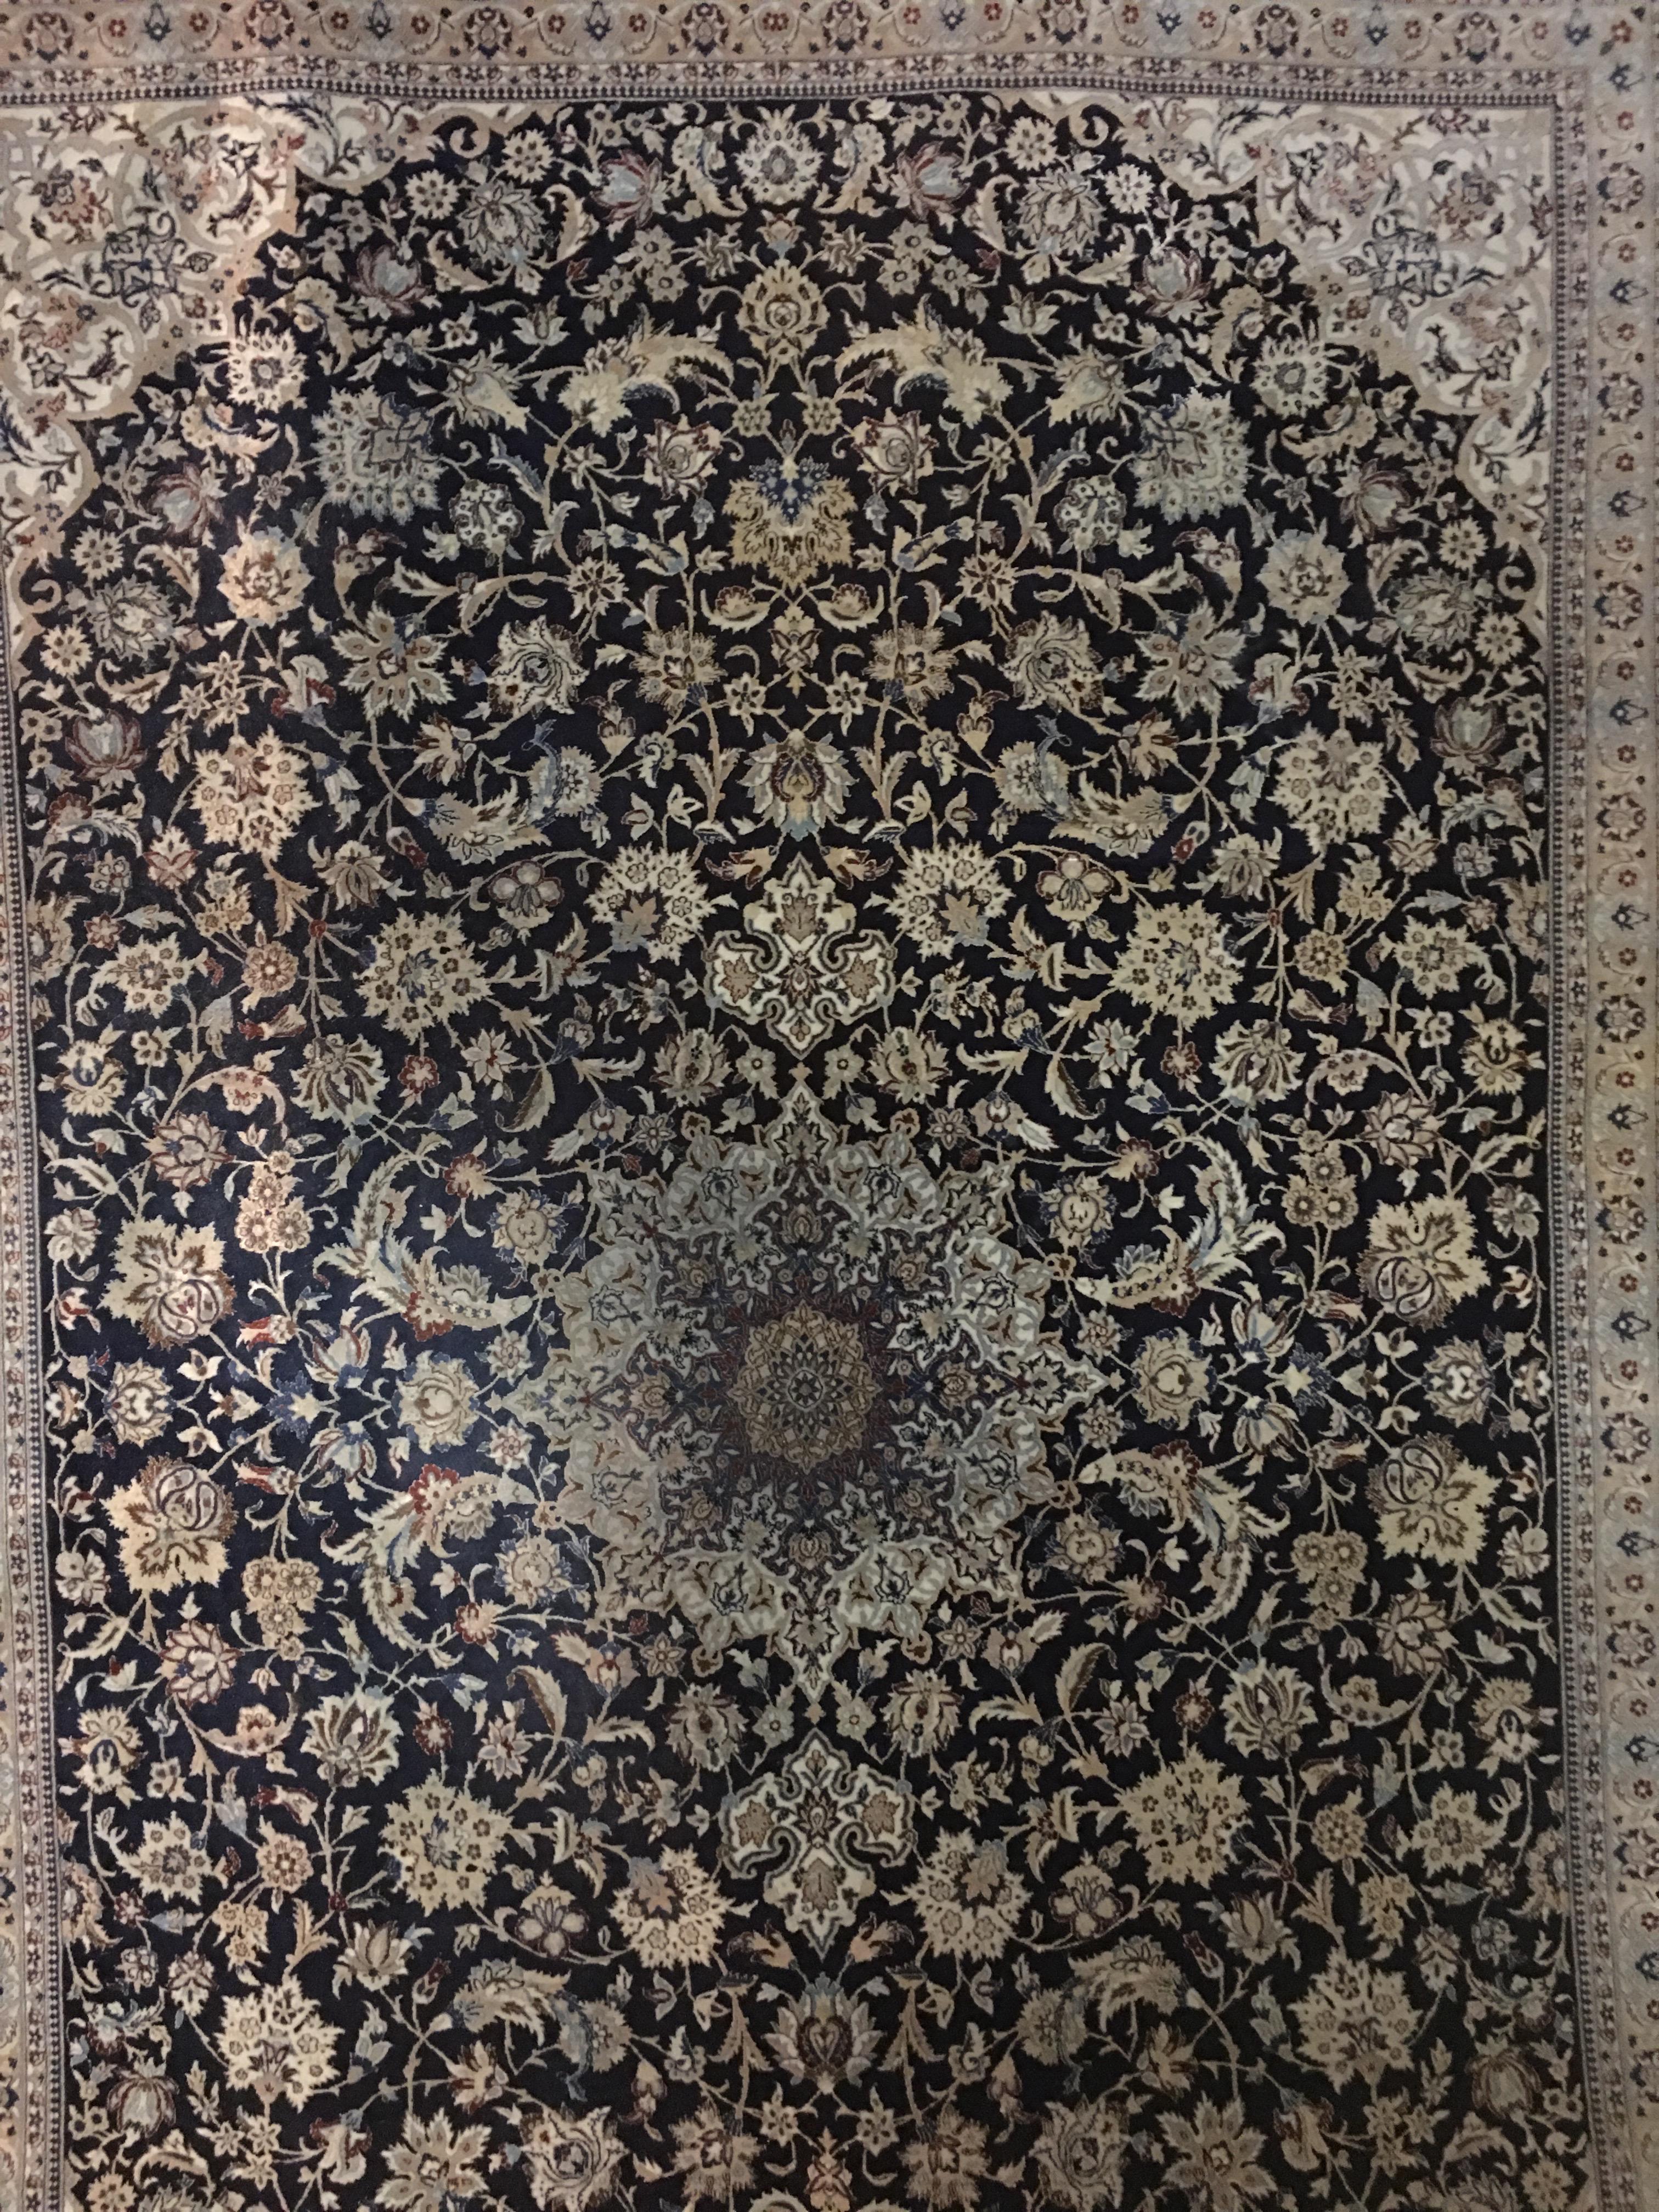 These luxury rugs are fine Persian carpet from Iran- Naein, with central medallion Persian rug designs. these natural rugs have mostly floral rug design, and highest quality Finely woven in a combination of wool and silk to create a classically